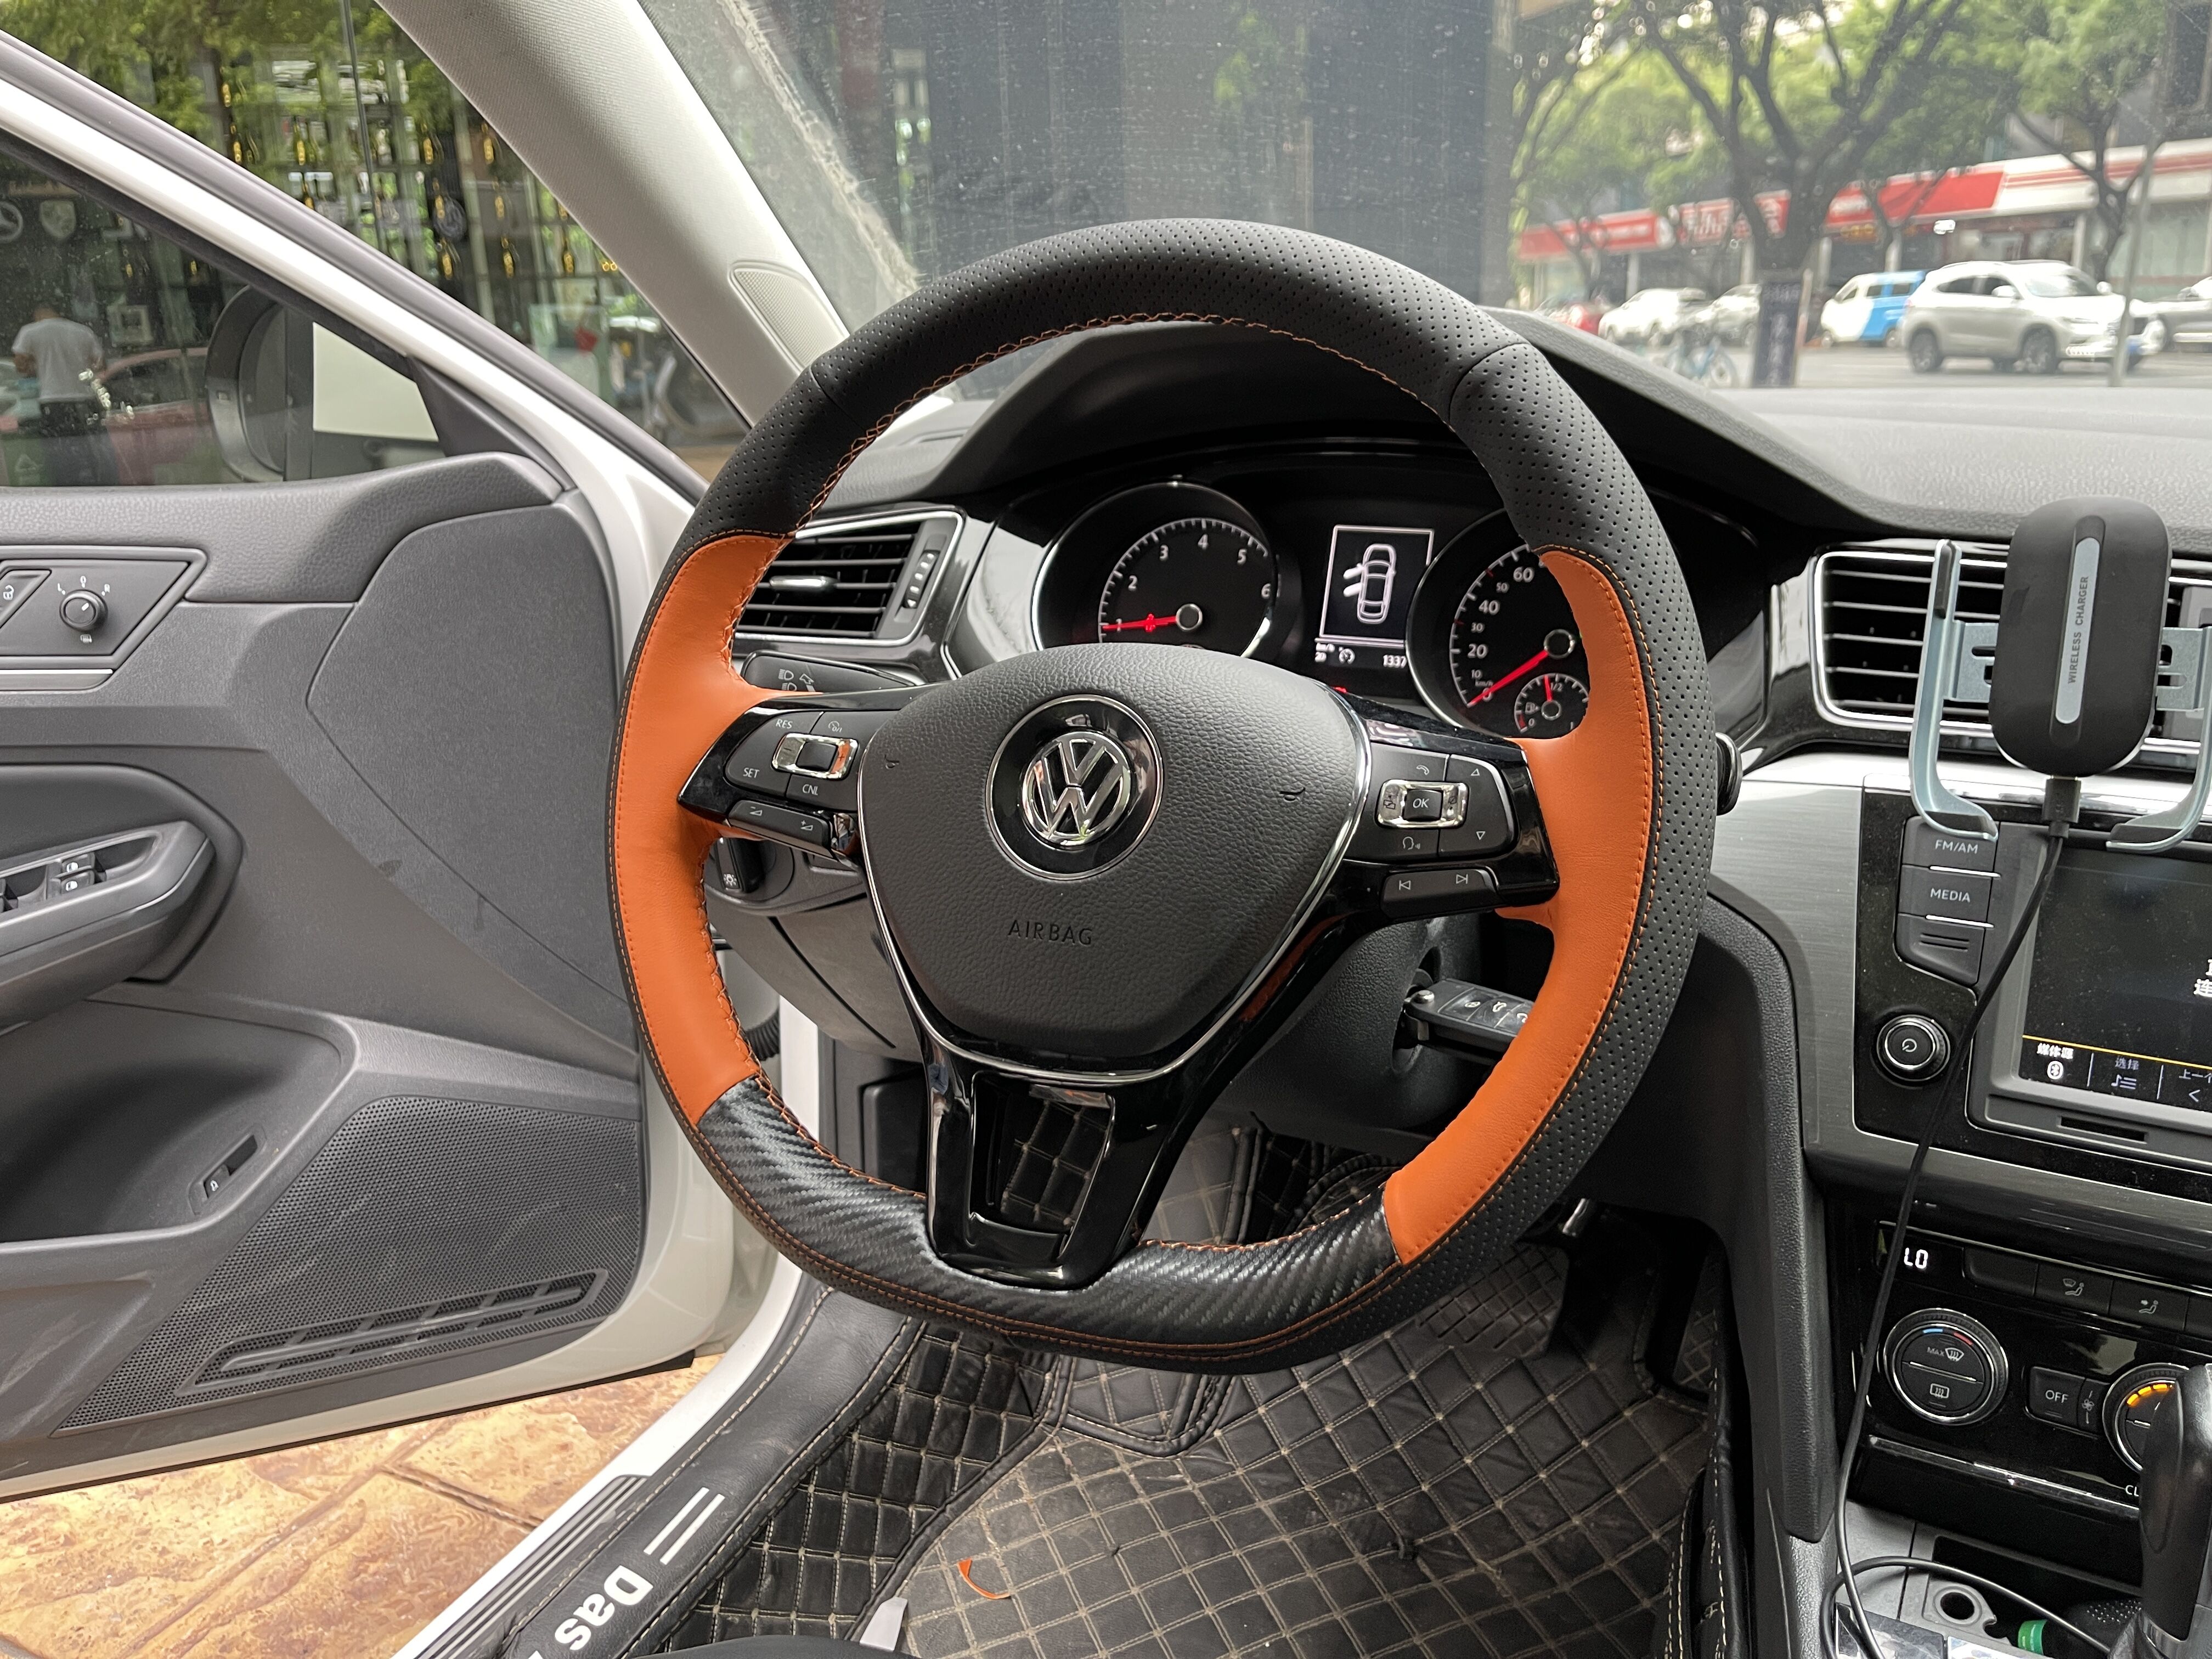 Why You Should Choose MEWANT Steering Wheel Cover for Wholesale